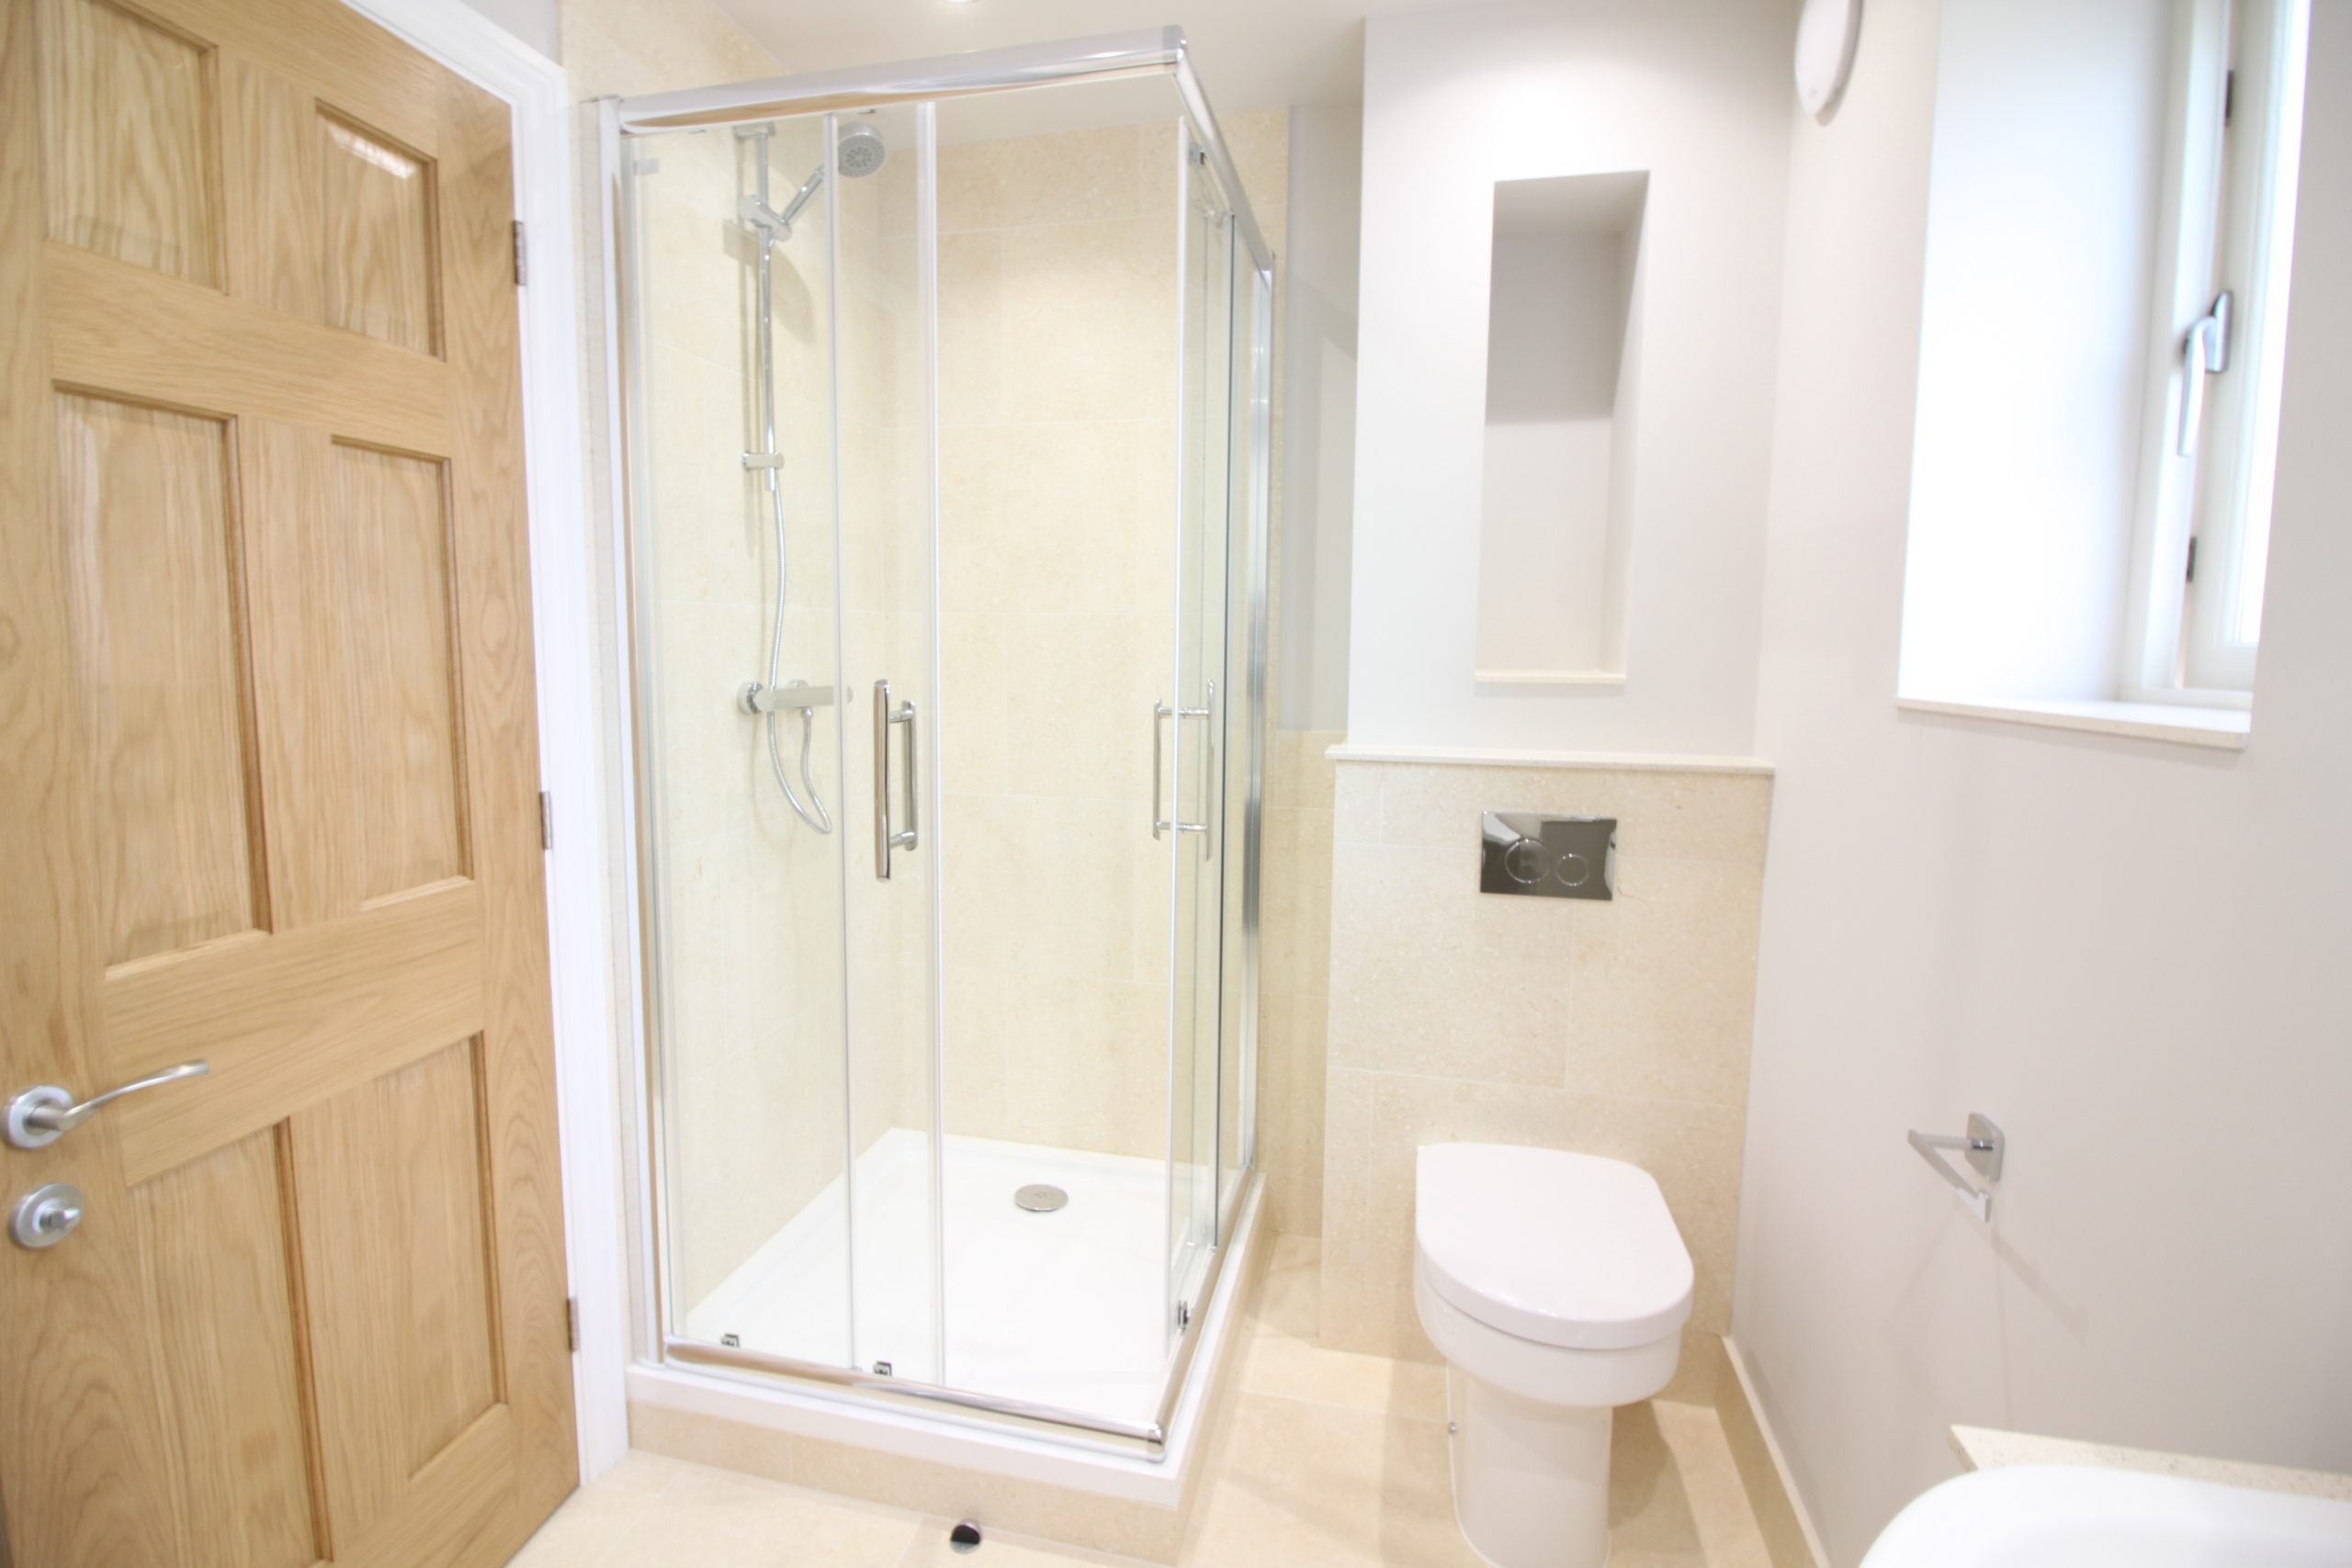 Shower Enclosure and Toilet